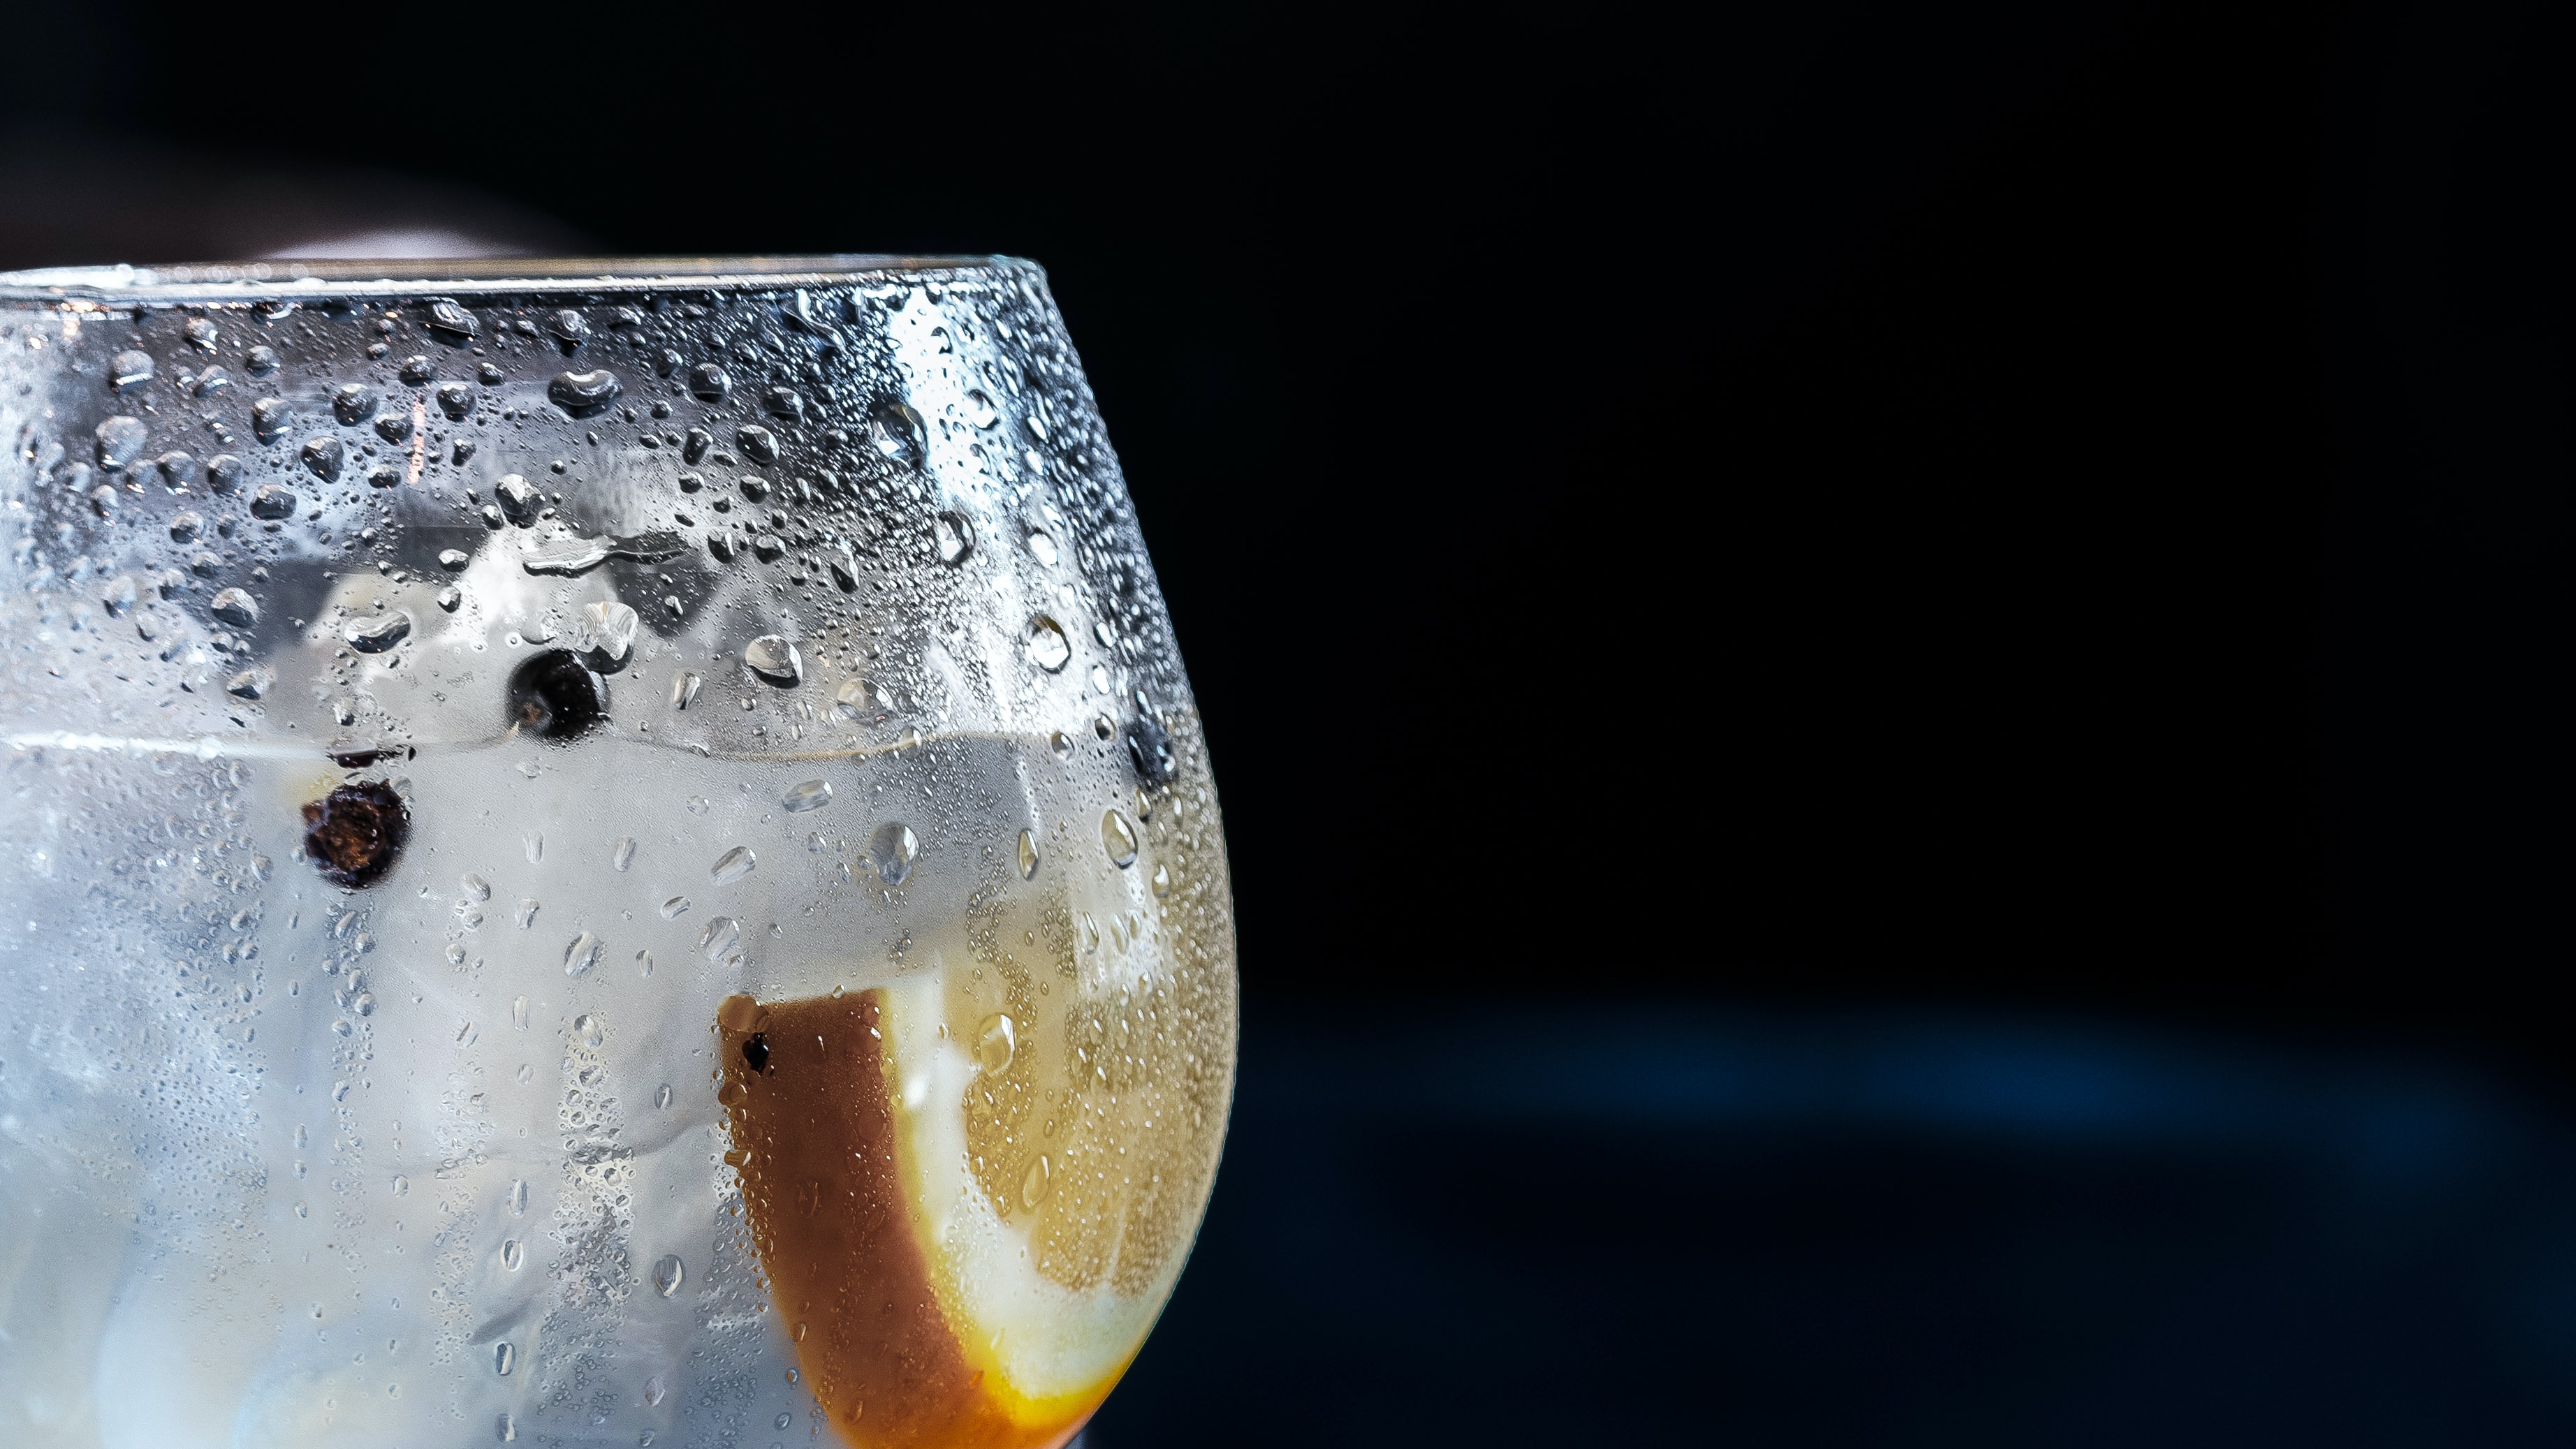 Glass of ice water with lemon; image by Jez Timms, via Unsplash.com.